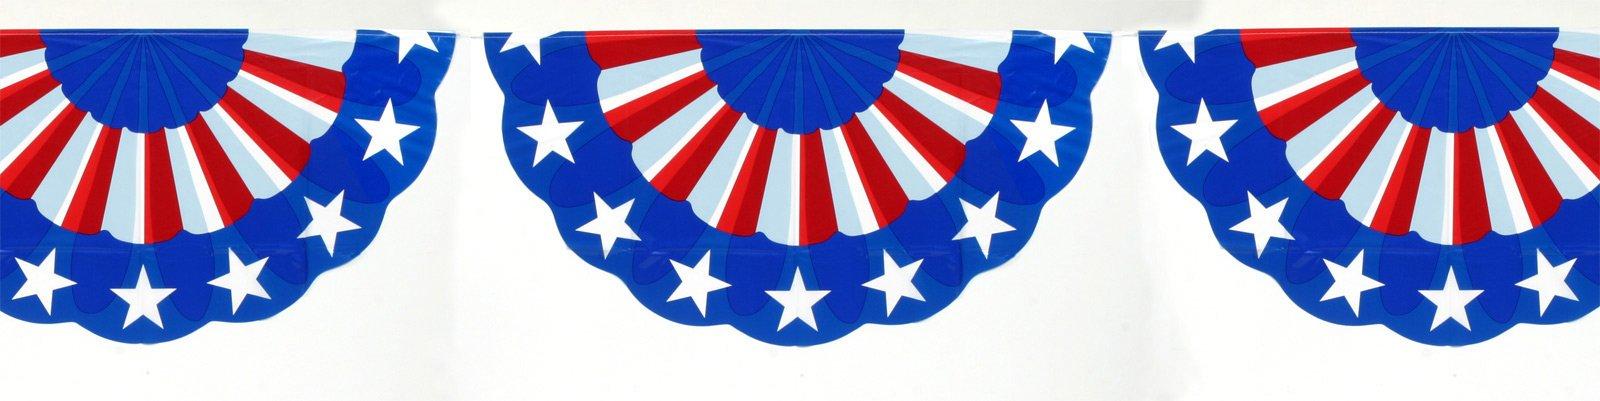 usa clipart bunting